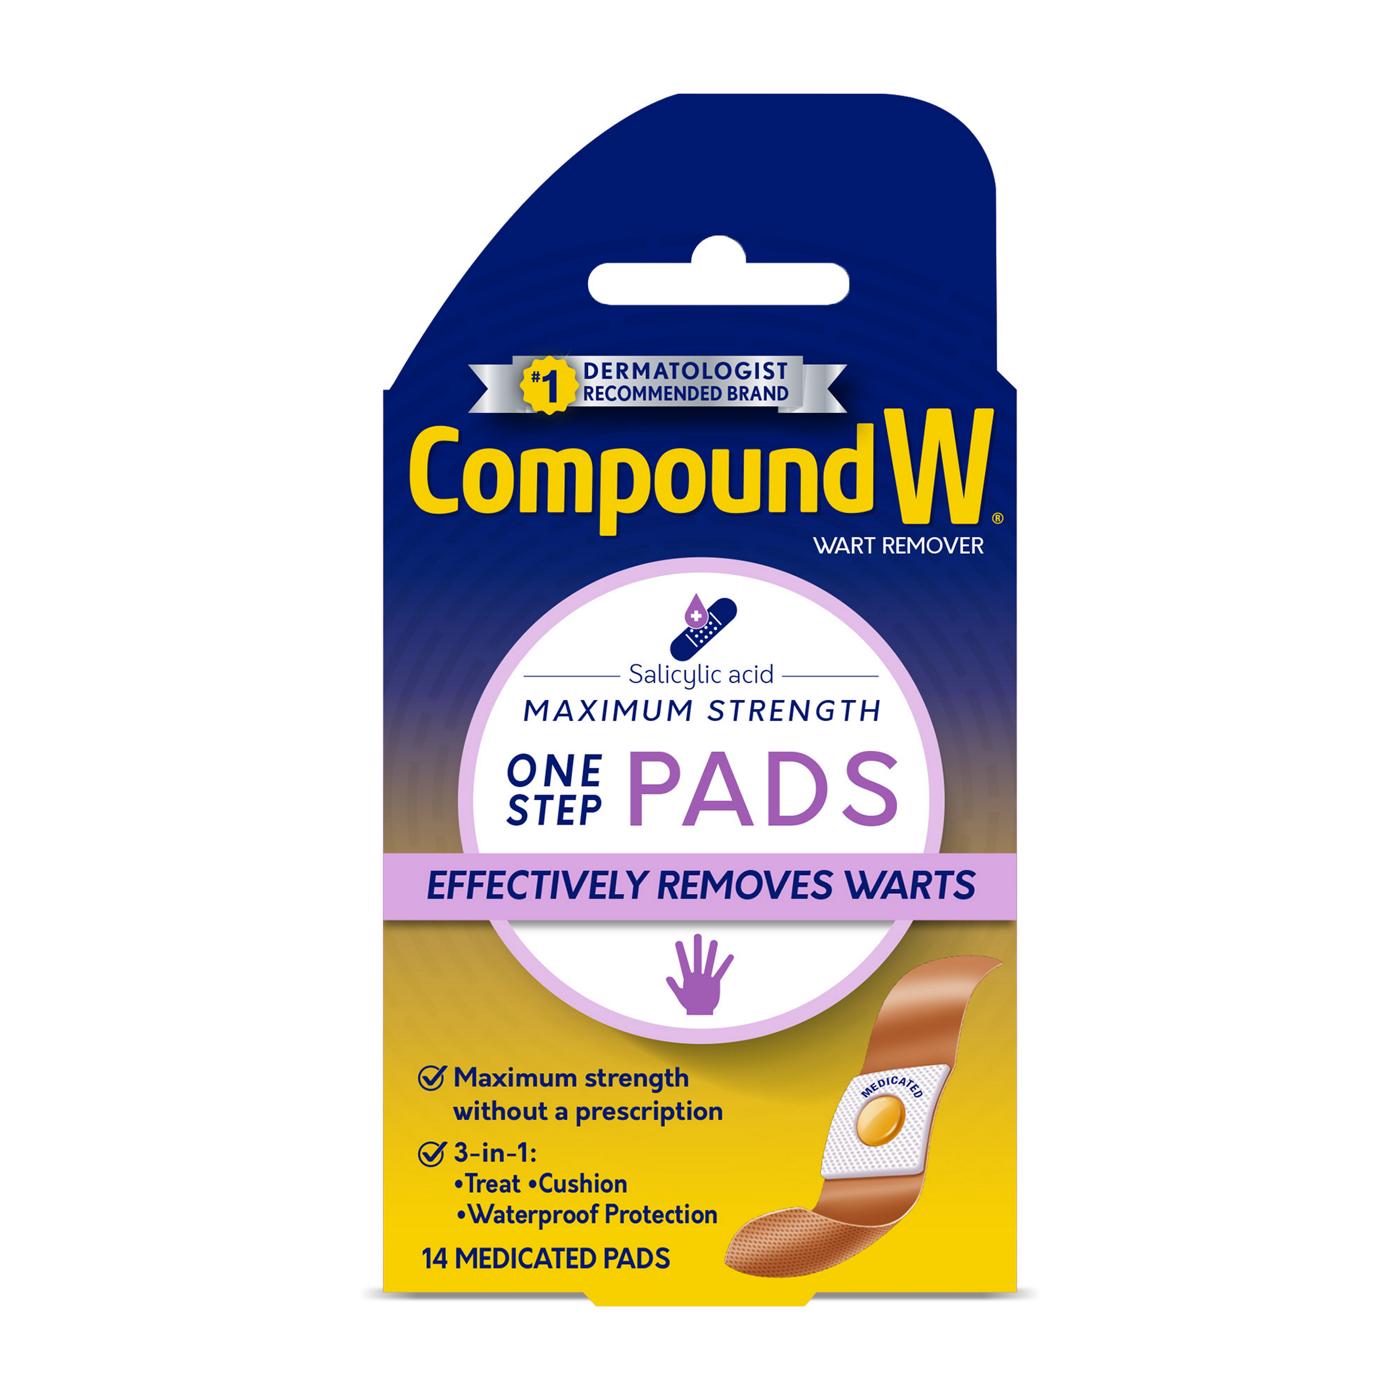 Compound W Wart Remover Pads; image 1 of 5